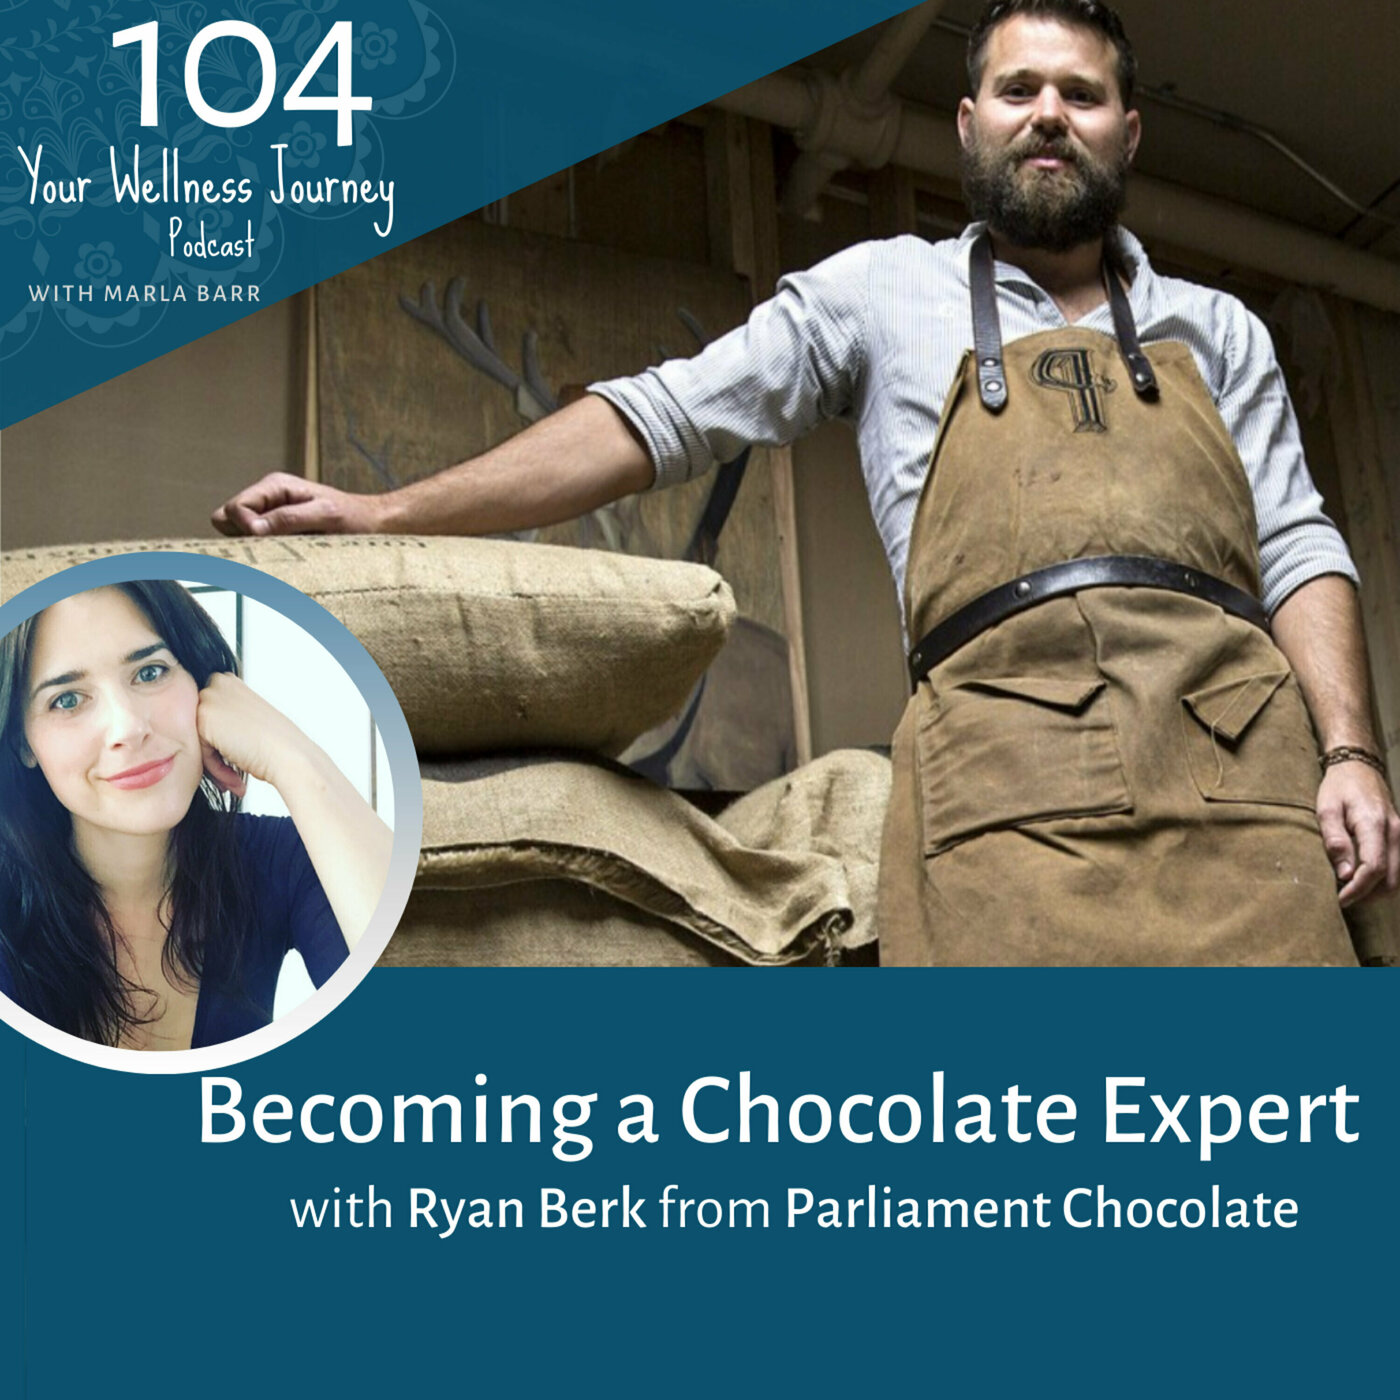 Becoming a Chocolate Expert with Ryan Berk from Parliament Chocolate